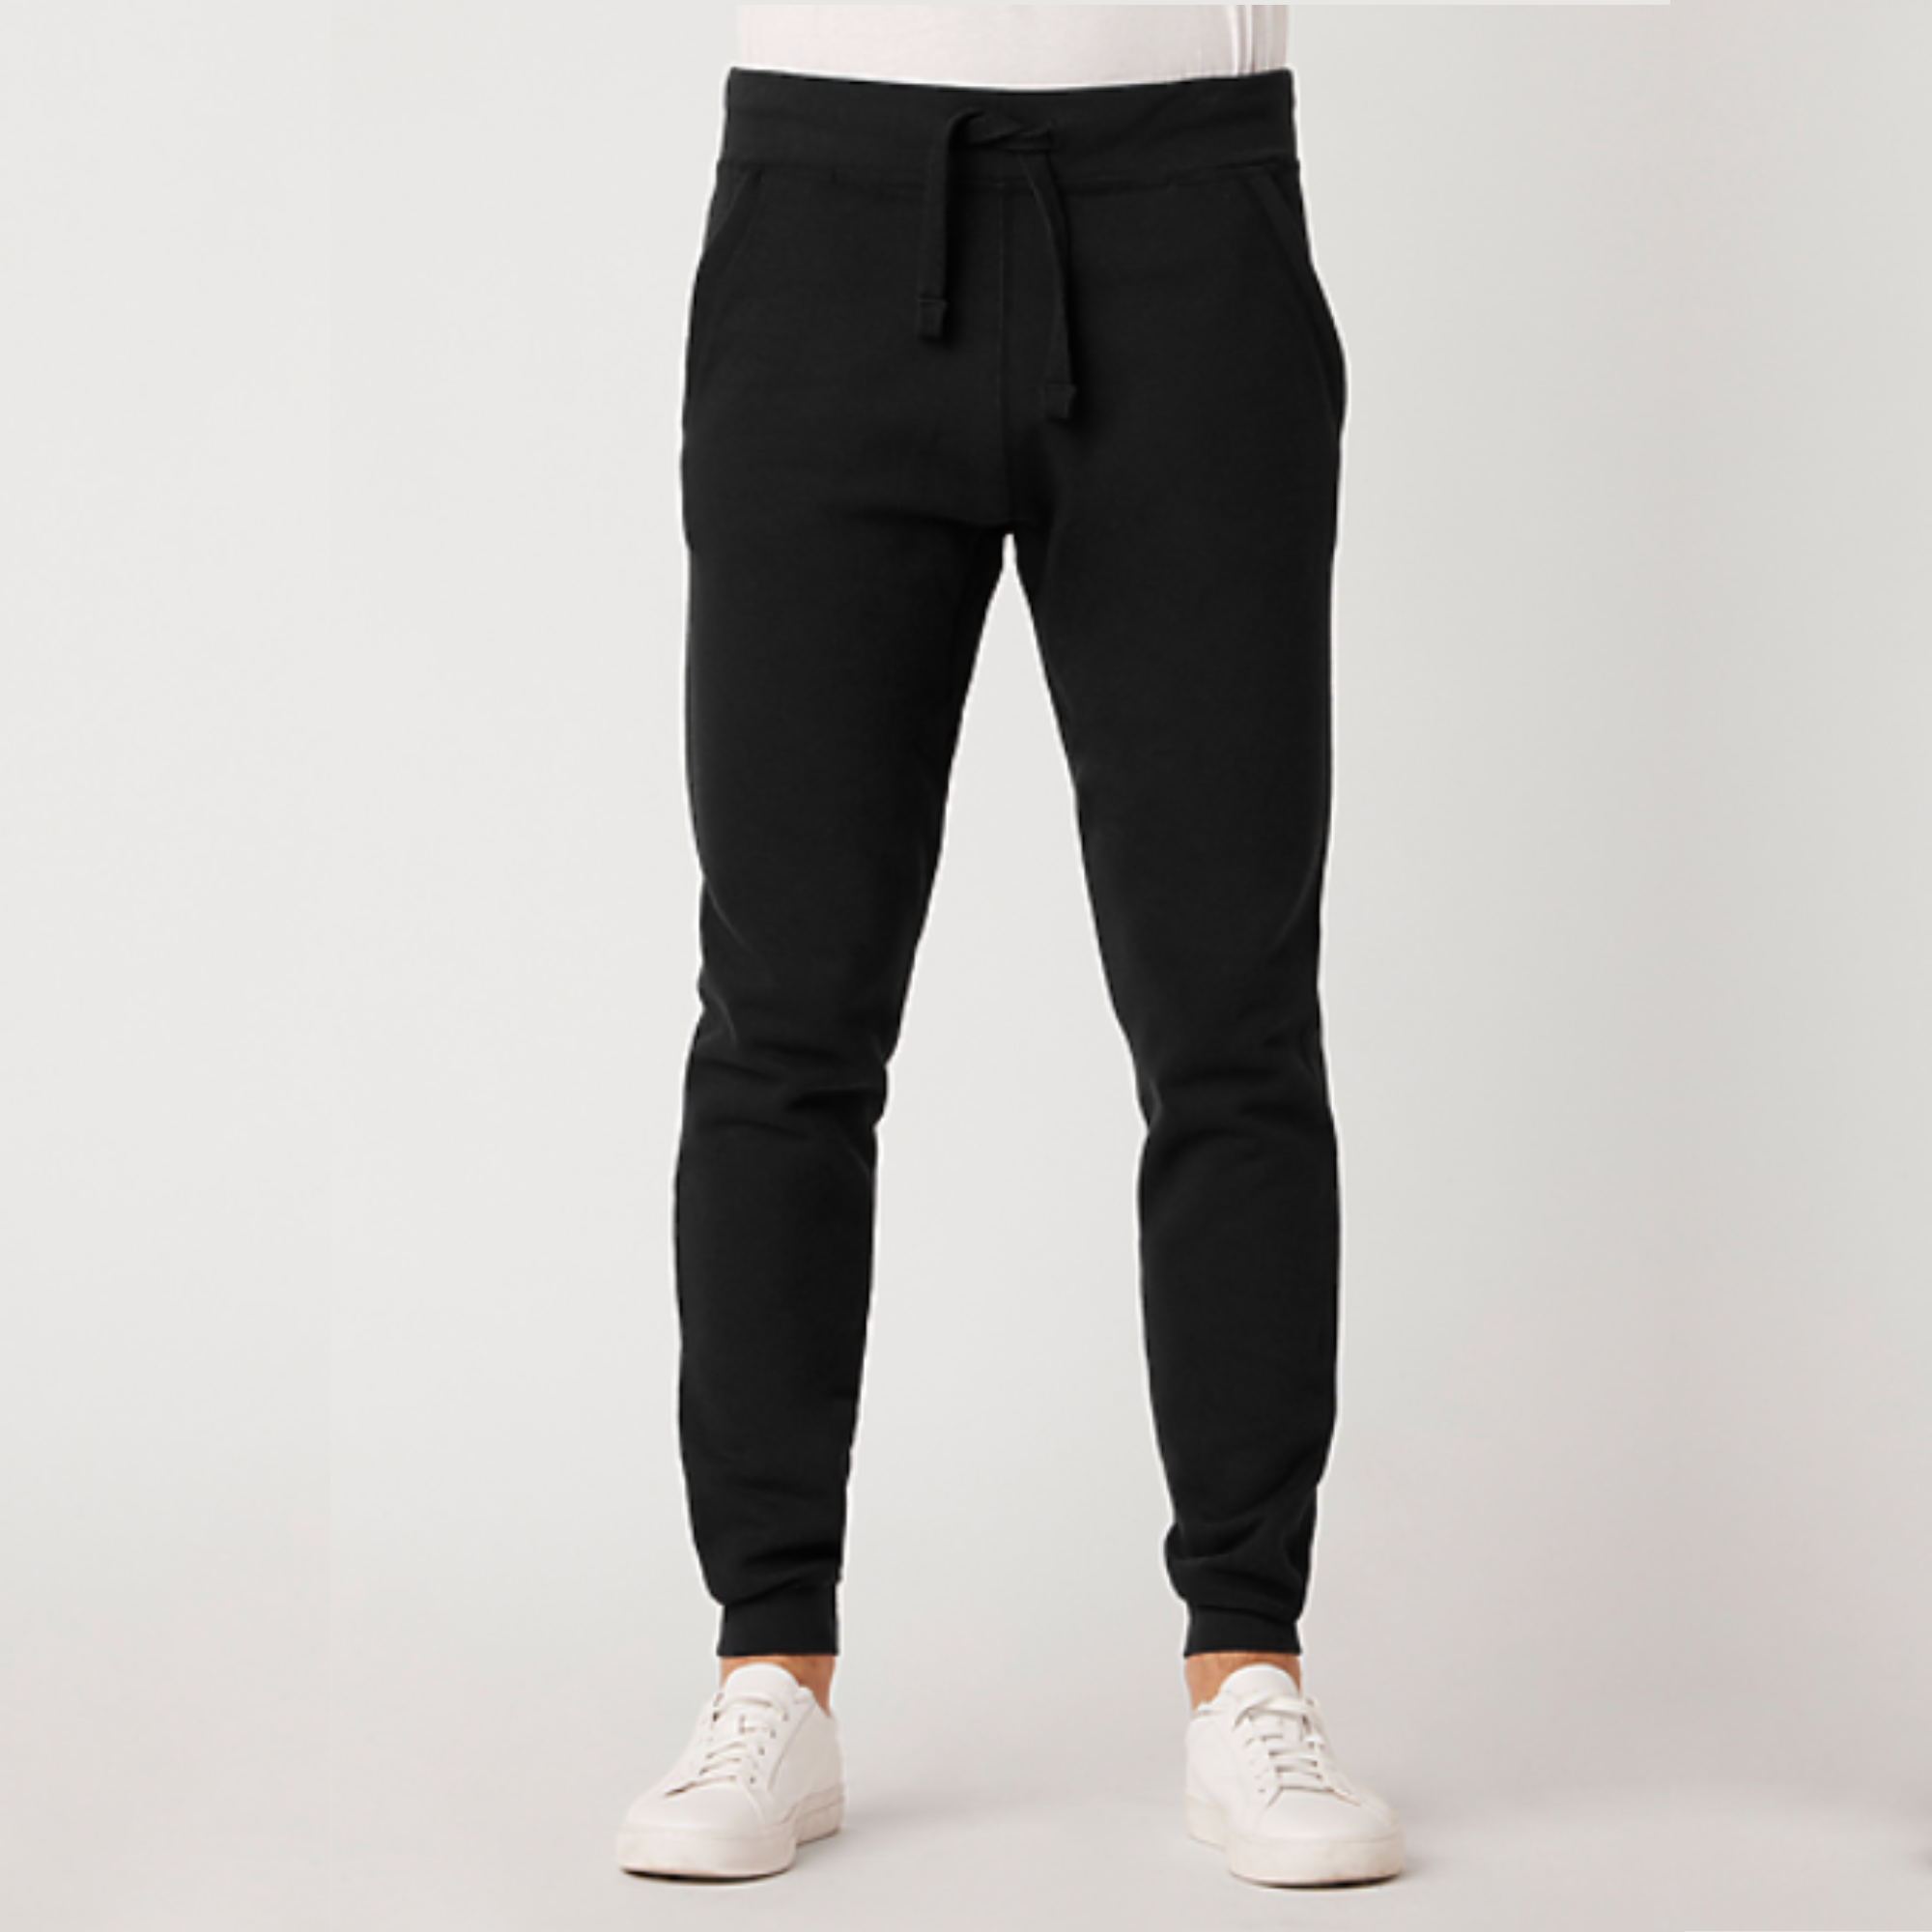 Washed Black Oversized Sweatpants x Baggy Fit - AETERIUS